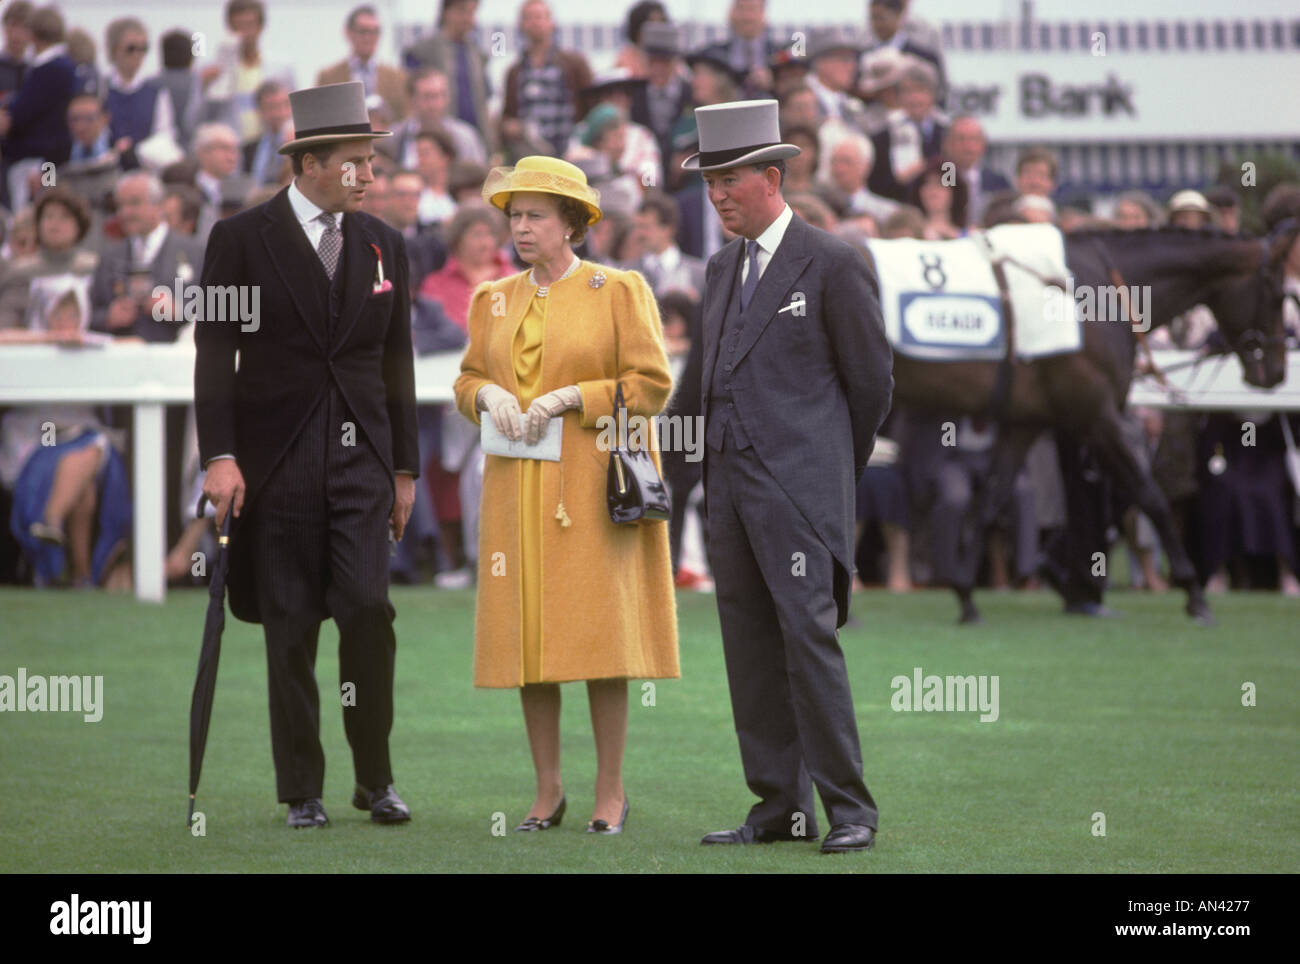 Lord Porchester the Earl Carnarvon (left) Queen Elizabeth II  in yellow dress with courtier at Derby Day horse race Epsom Downs Surrey 1984 1980s UK Stock Photo